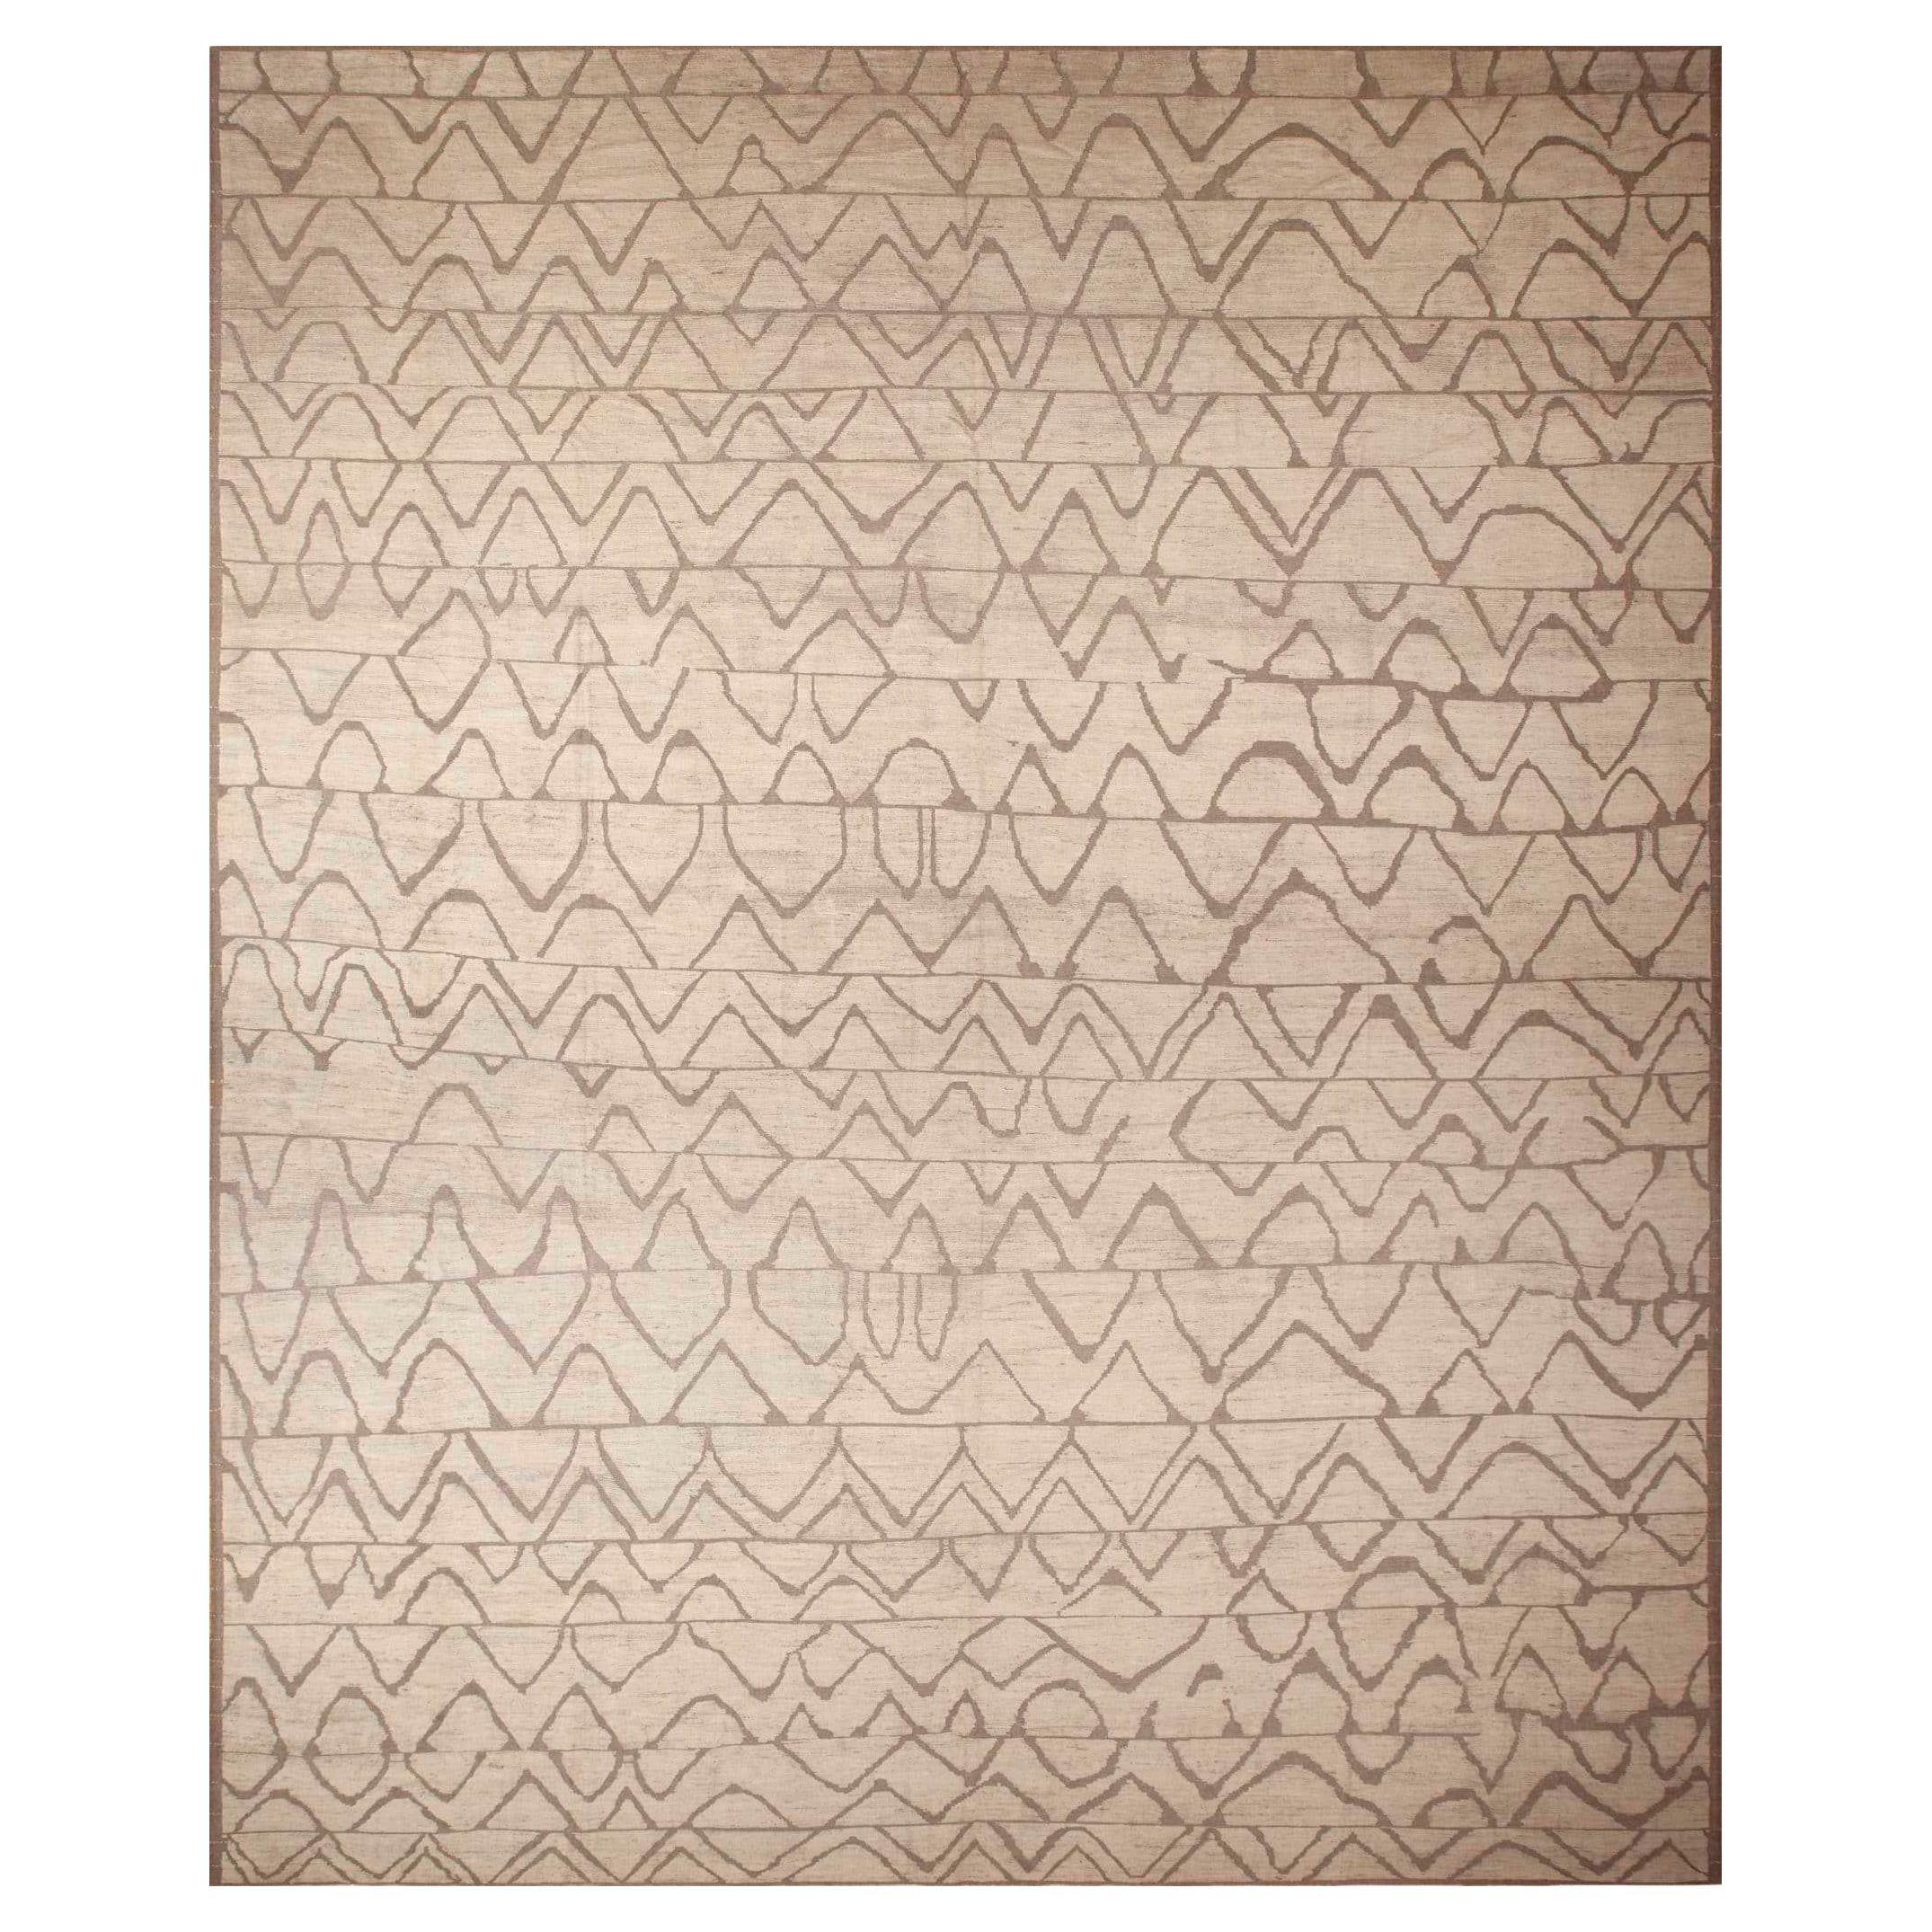 Nazmiyal Collection Oversized Ivory Tribal Design Modern Area Rug 20' x 24'4" For Sale